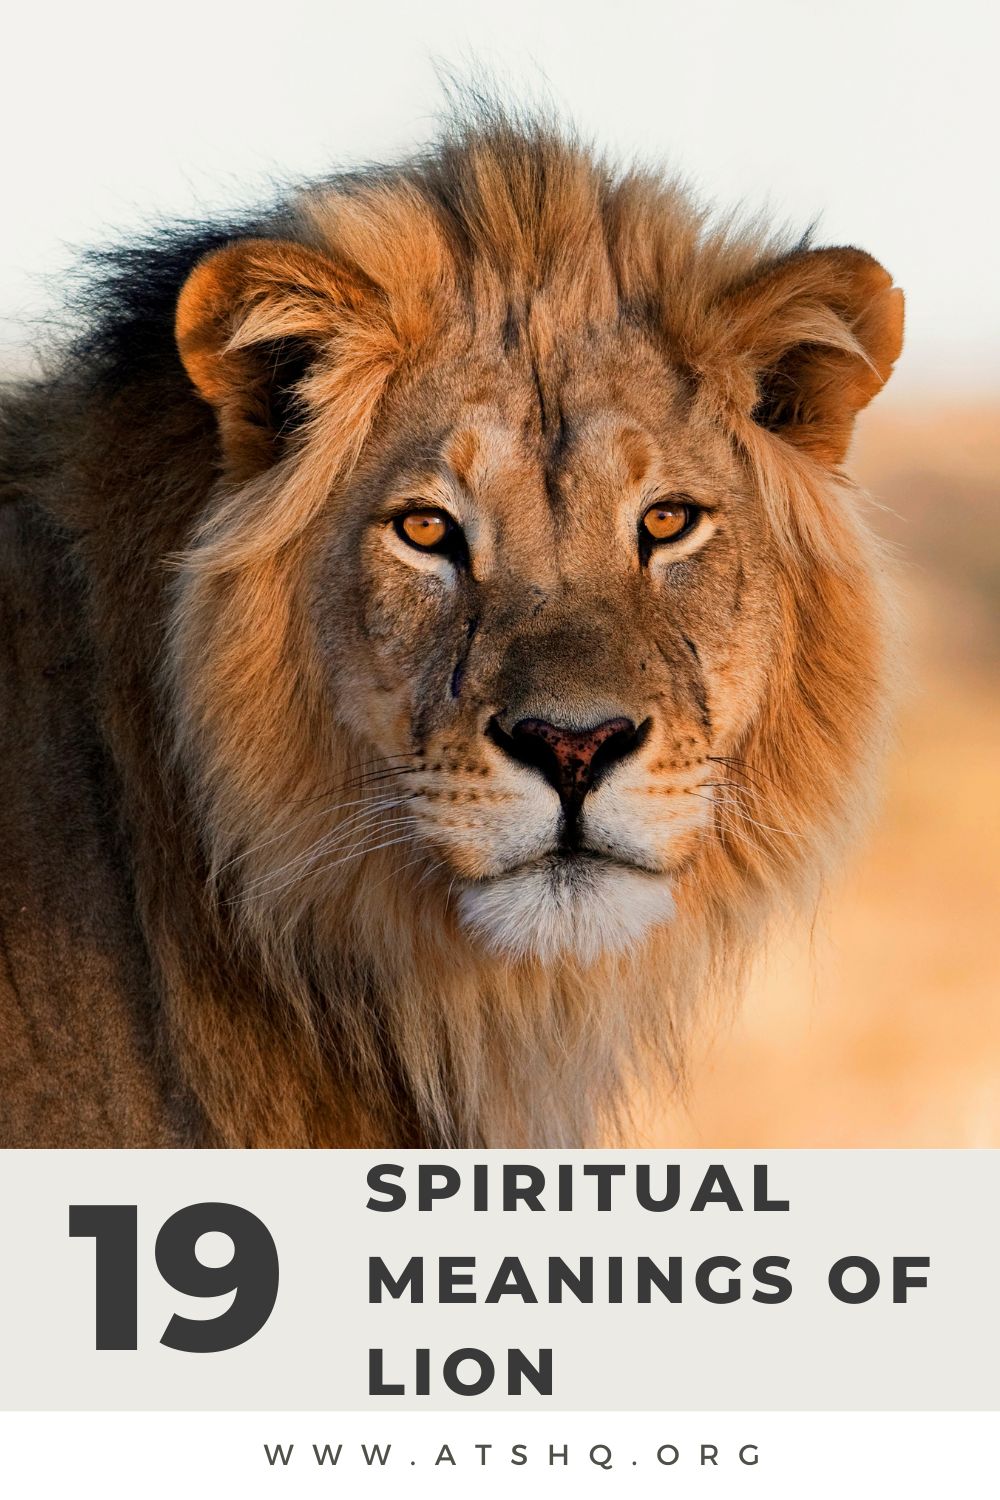 19 Spiritual Meanings Of Lion